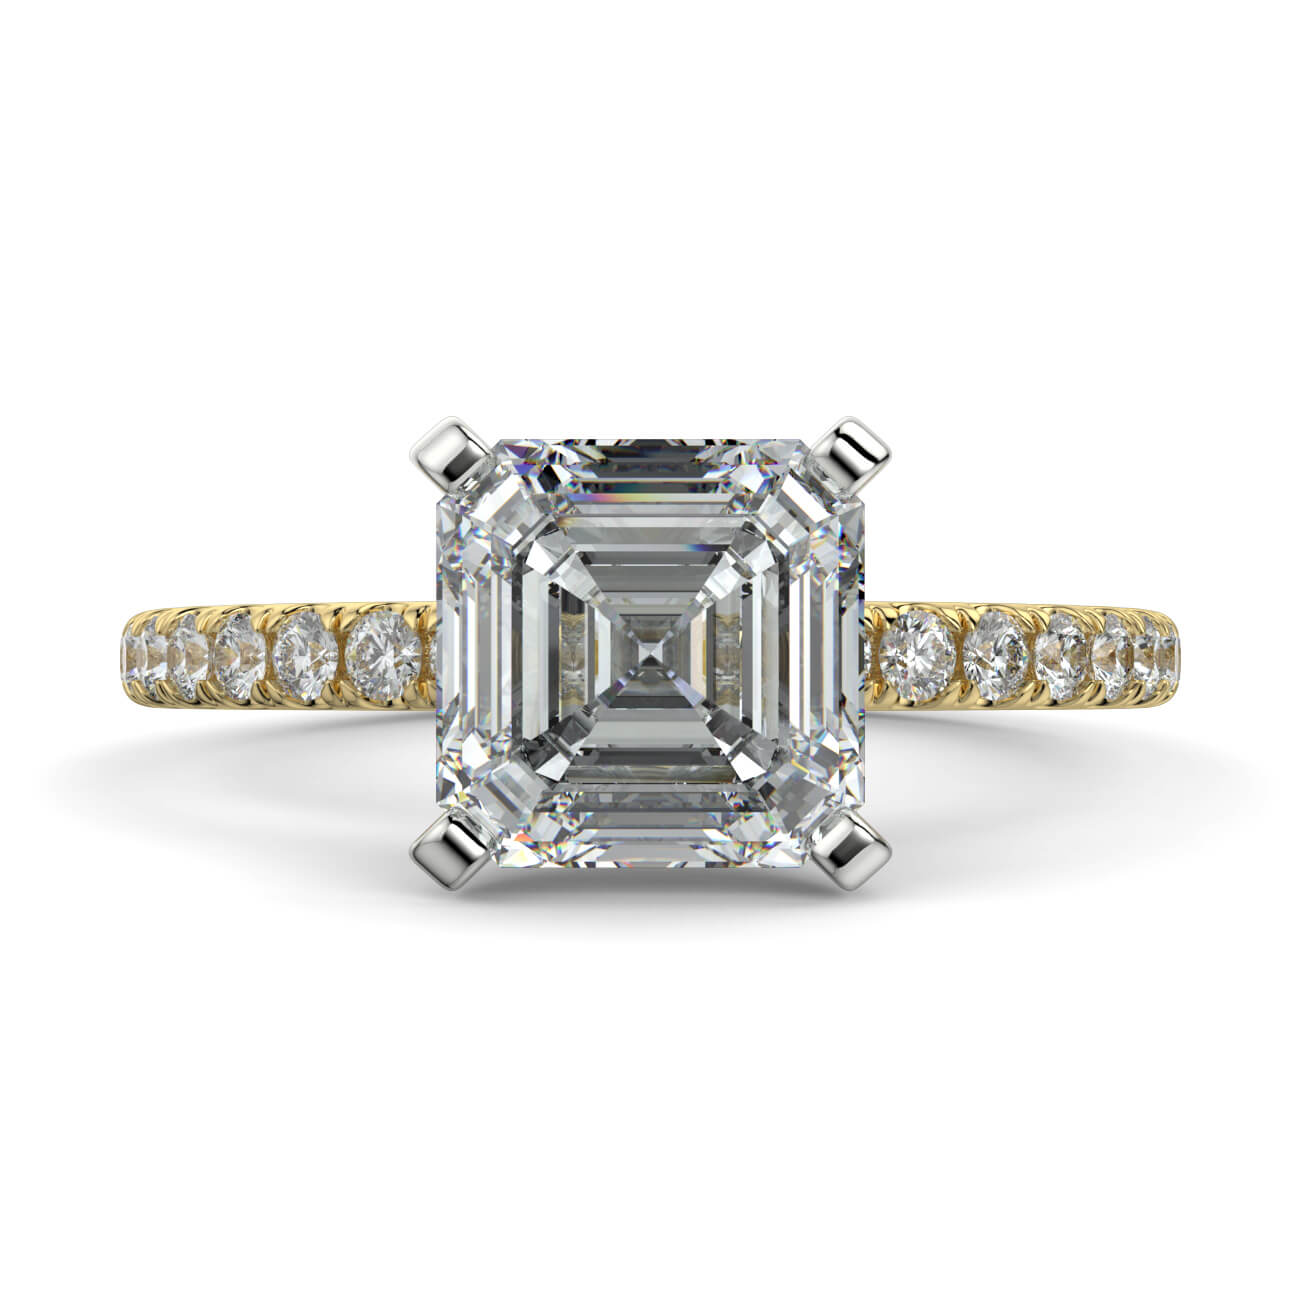 Delicate ‘Liat’ Asscher Cut Diamond Engagement Ring in 18k Yellow and White Gold – Australian Diamond Network